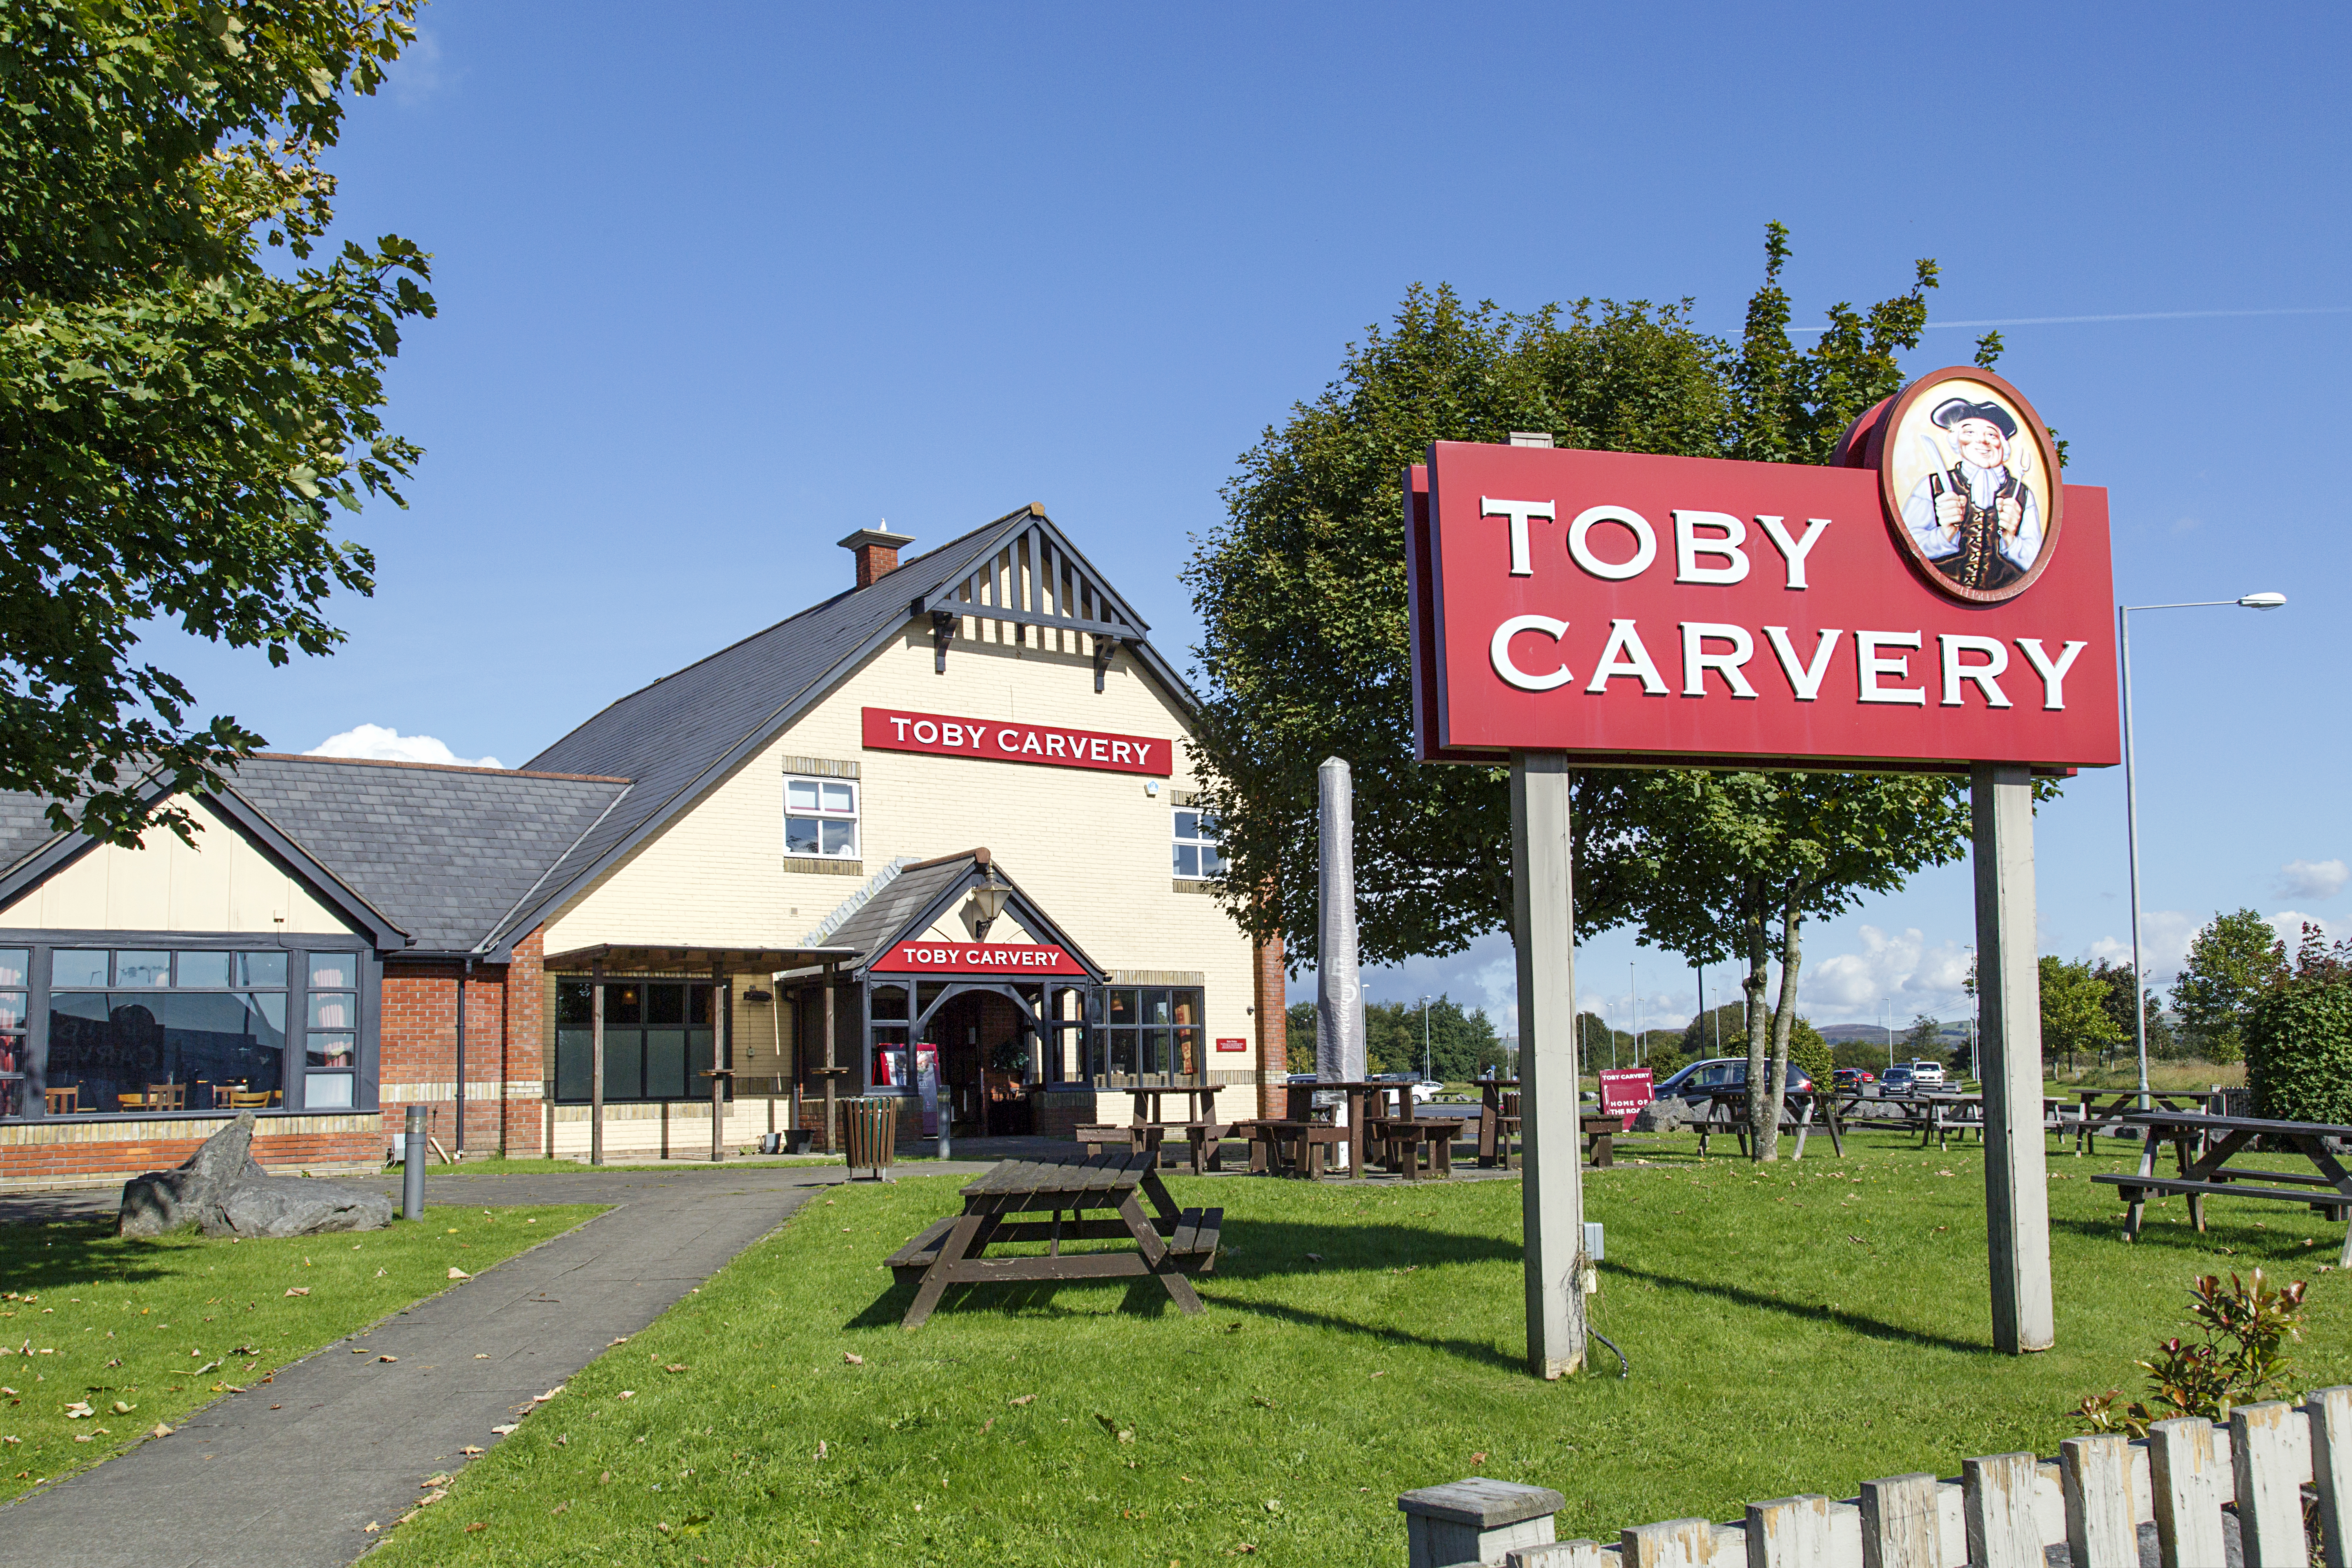 Toby Carvery is offering shoppers the chance to eat for as little as £2 per person